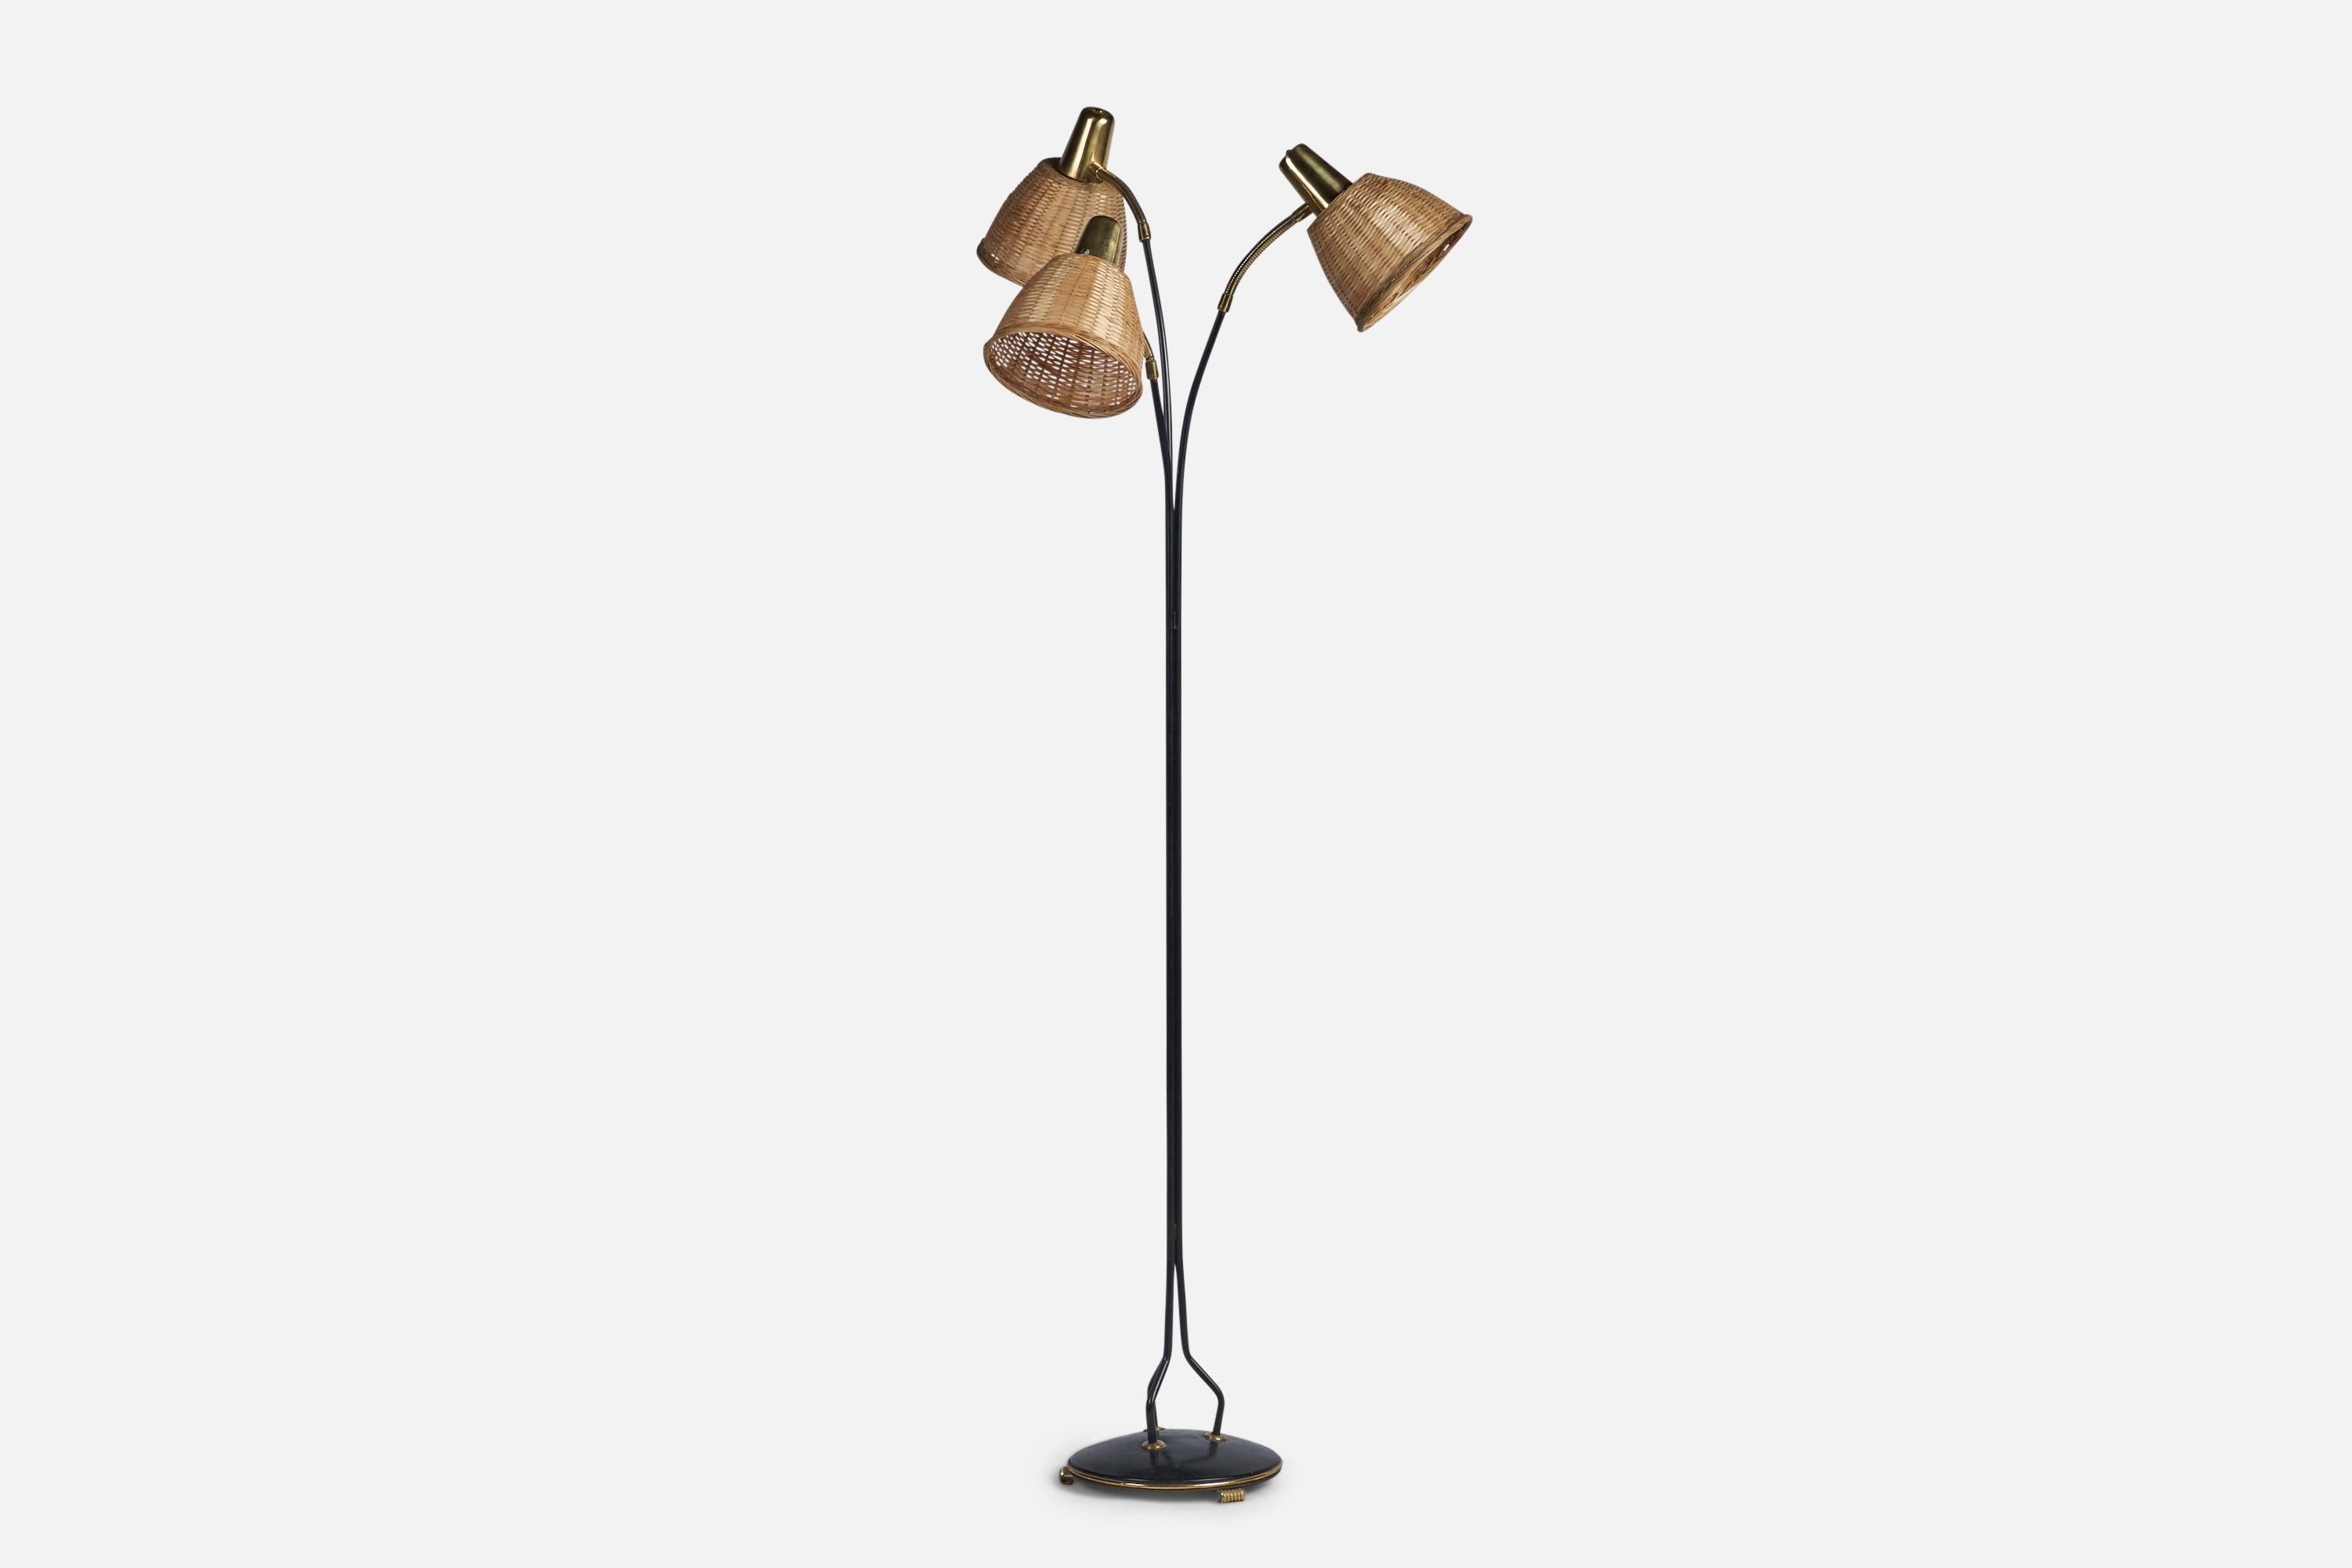 A three-armed adjustable brass, black-lacquered metal and rattan floor lamp designed and produced in Sweden, c. 1960s.

Overall Dimensions (inches): 59.5” H x 24” Diameter
Bulb Specifications: E-26 Bulb
Number of Sockets: 3
All lighting will be